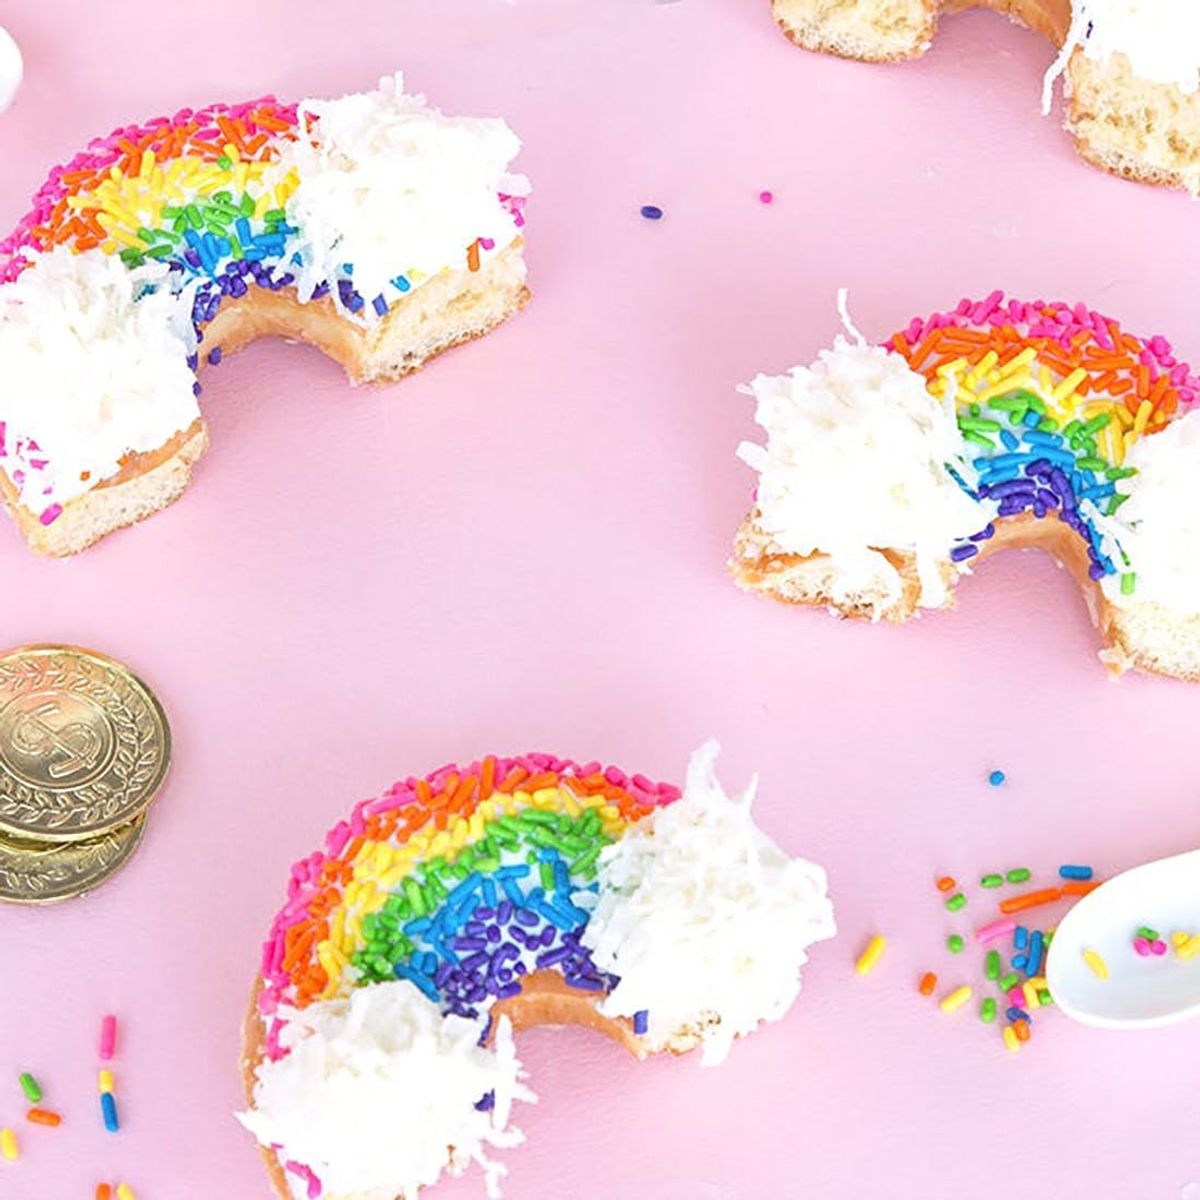 12 Creative Donut Recipes That Are Ultra Photogenic